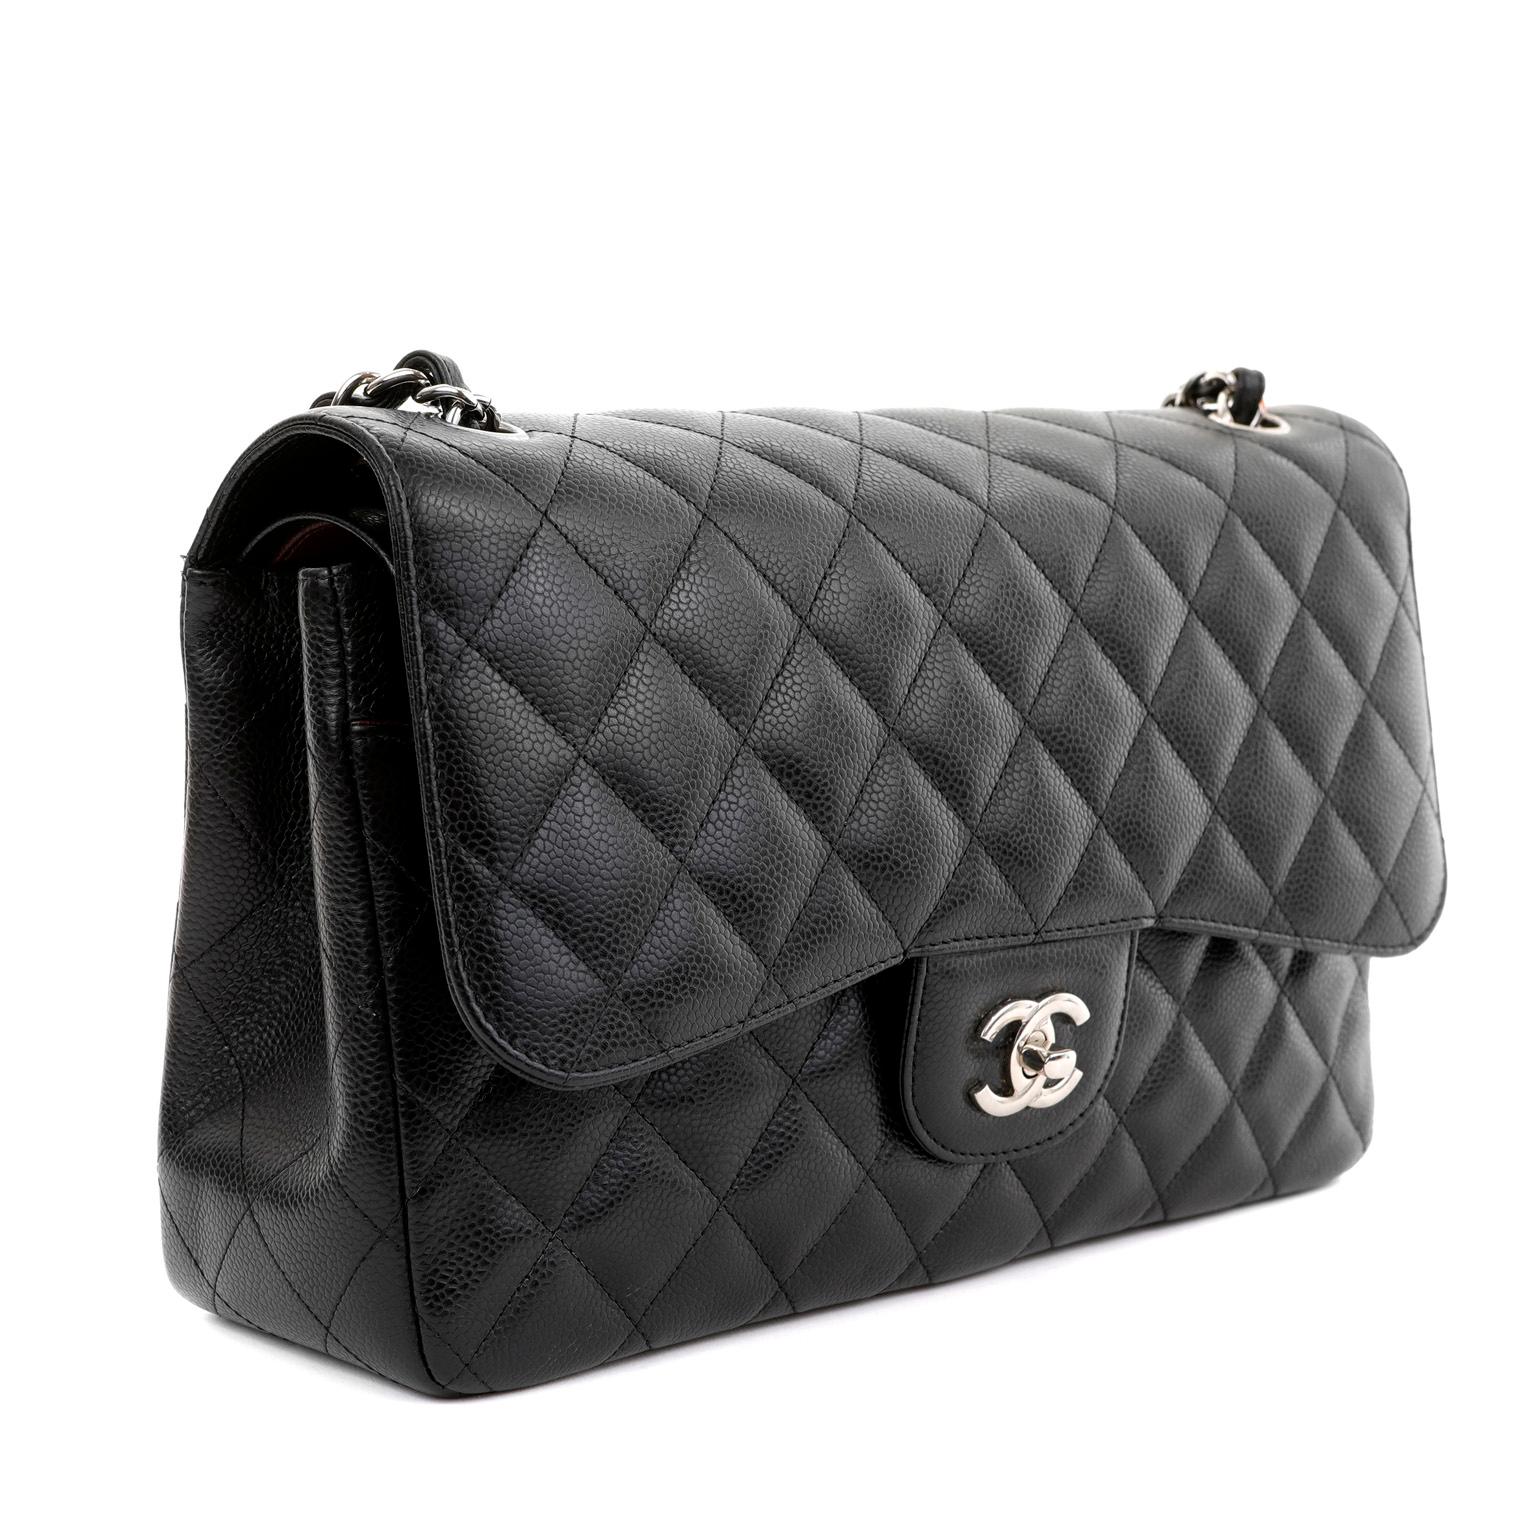 Chanel Black Caviar Jumbo Classic Flap Bag with Silver Hardware In Excellent Condition For Sale In Palm Beach, FL